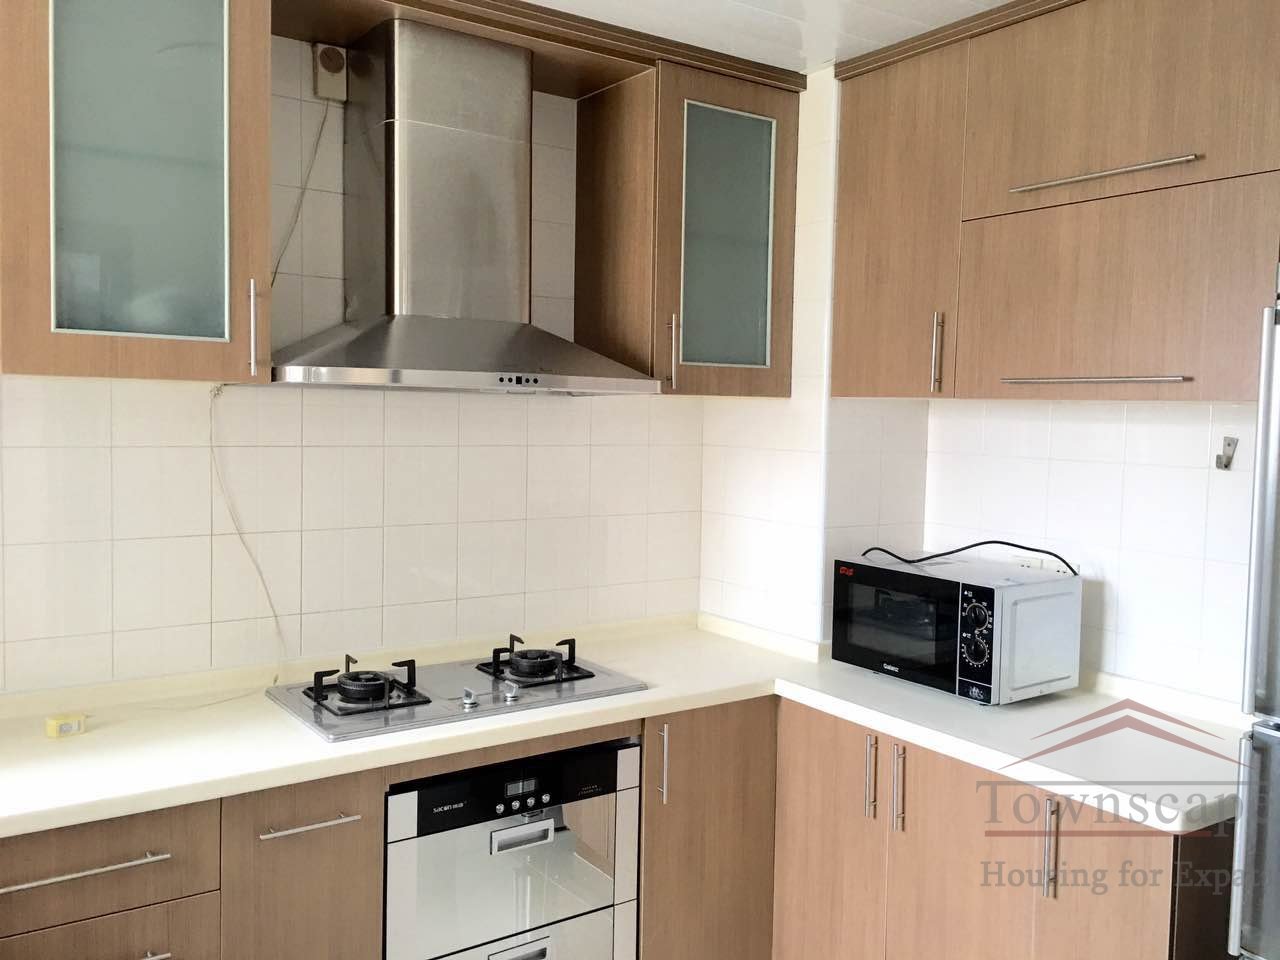 Uptown Gubei 4br Spacious 4br family apartment in Gubei